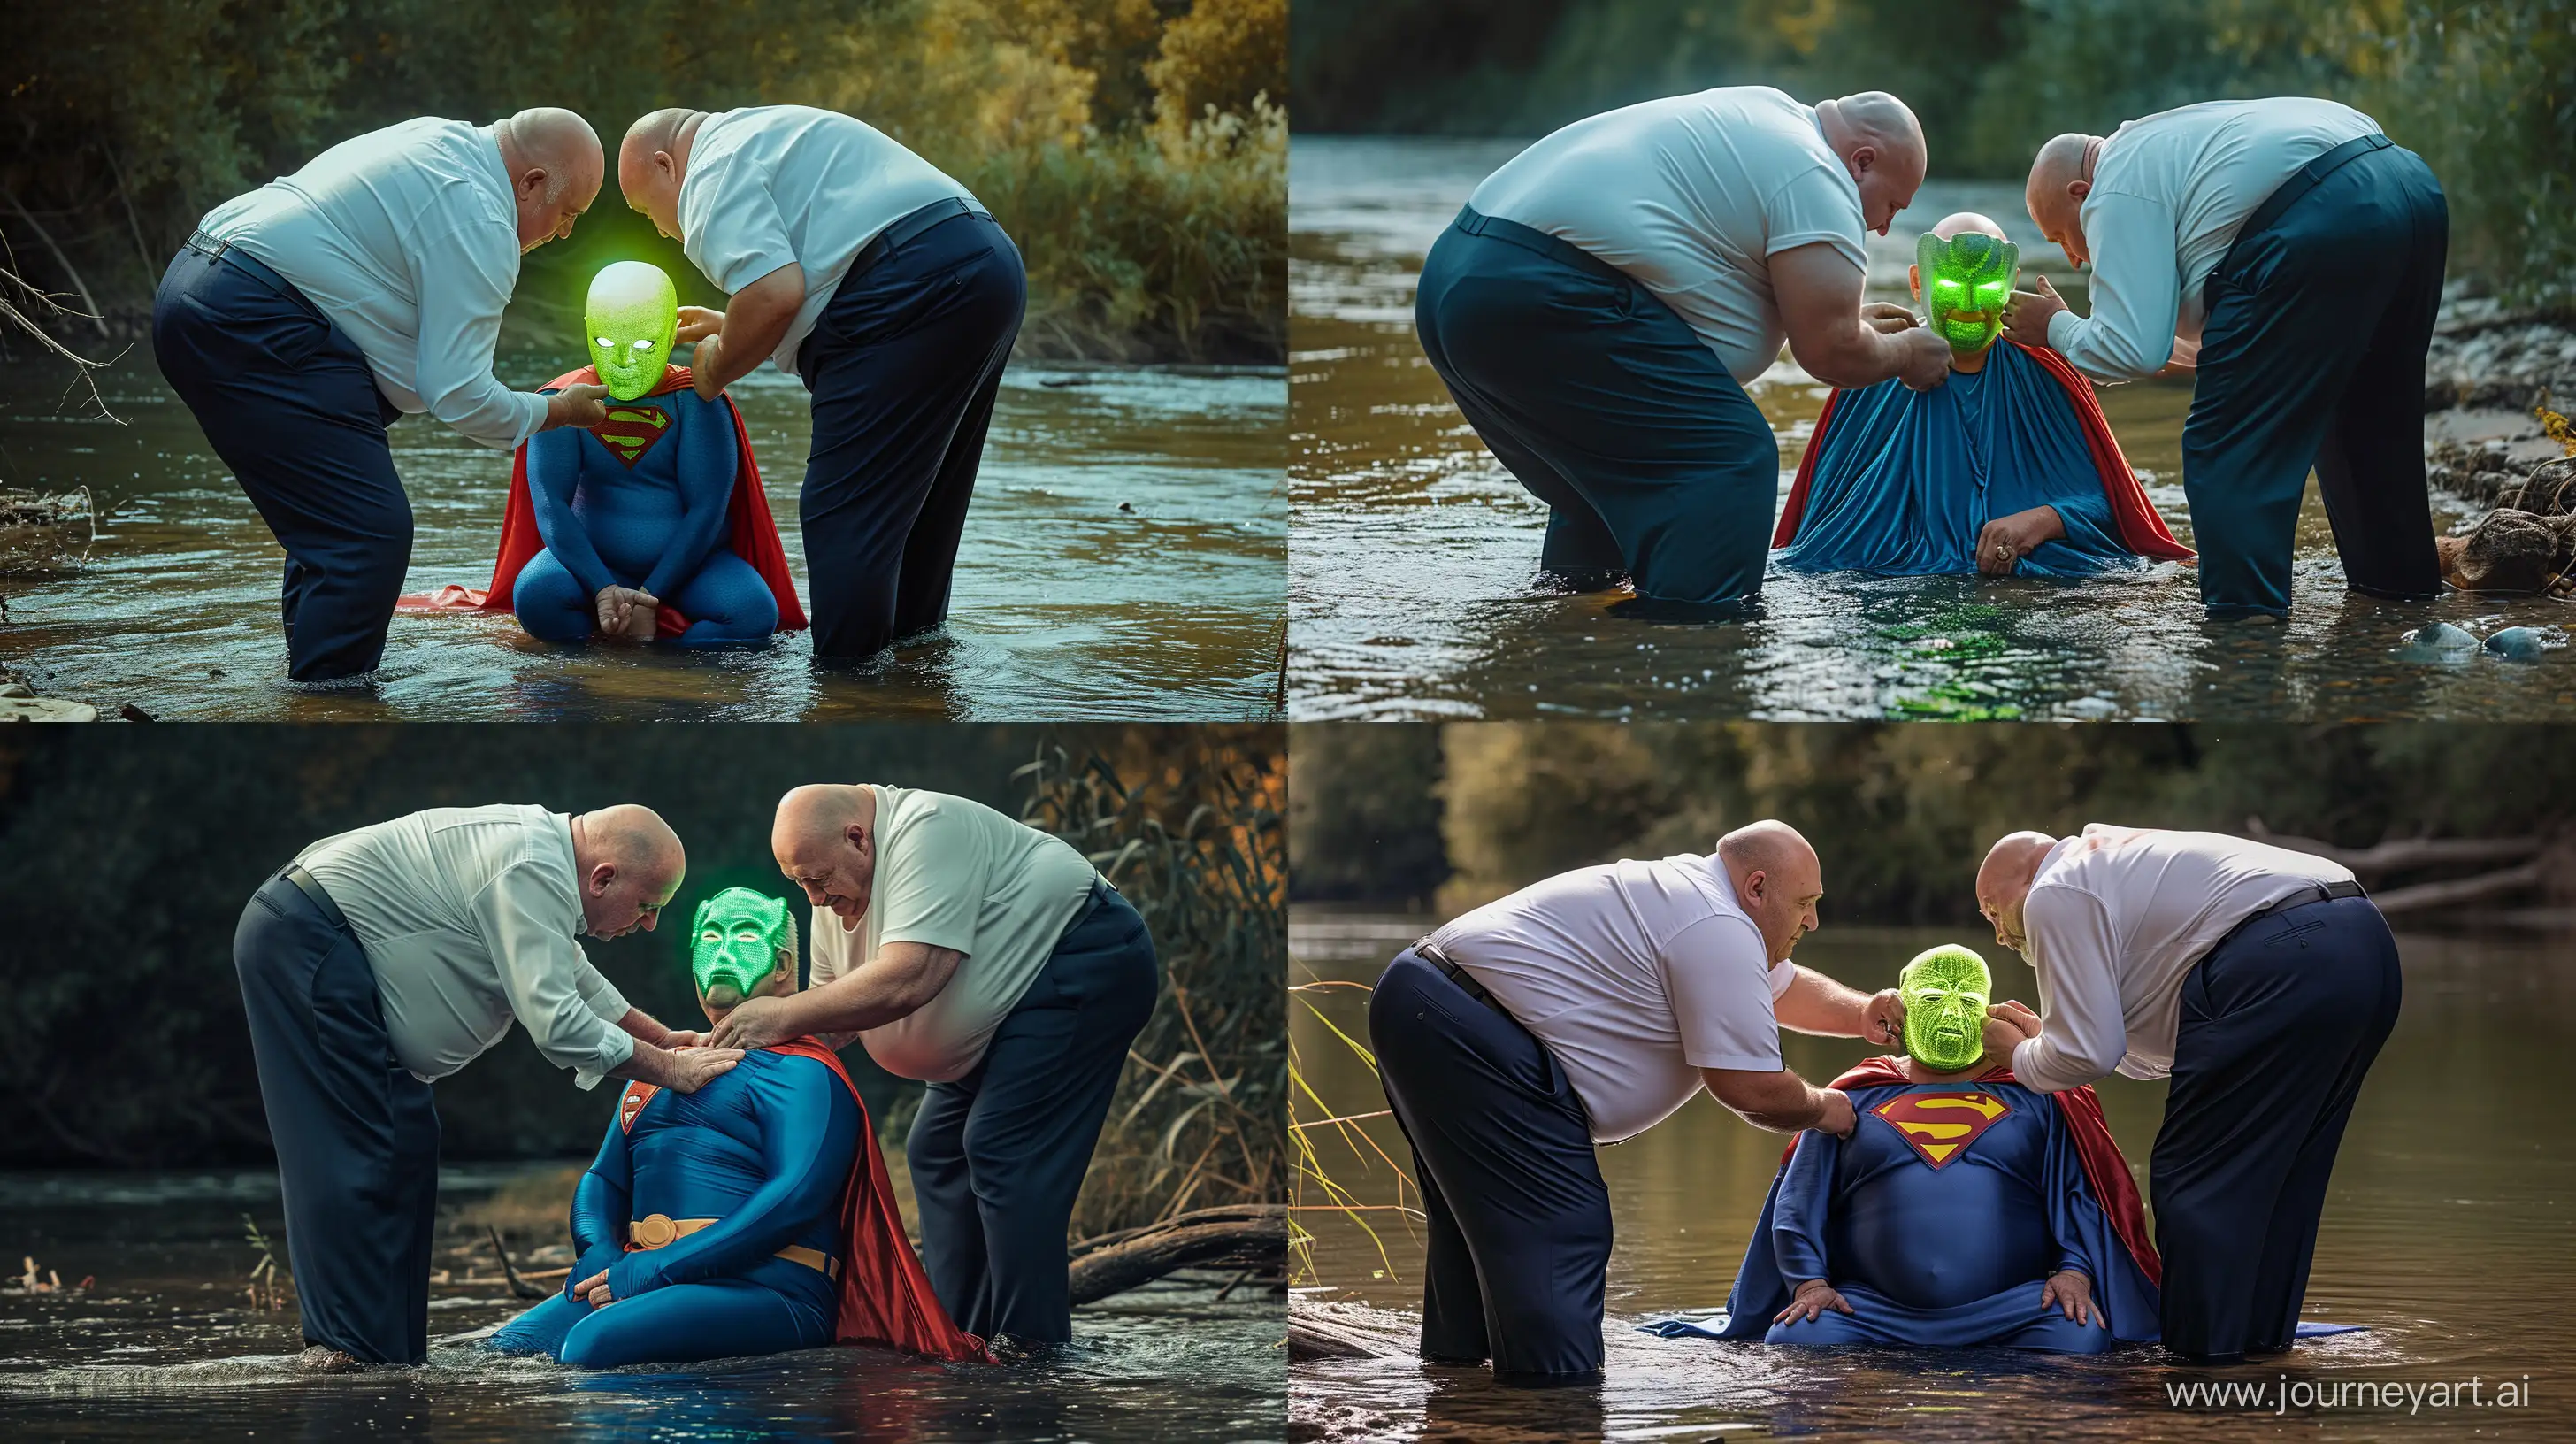 Elderly-Friends-Playfully-Embrace-Superhero-Transformation-by-the-River